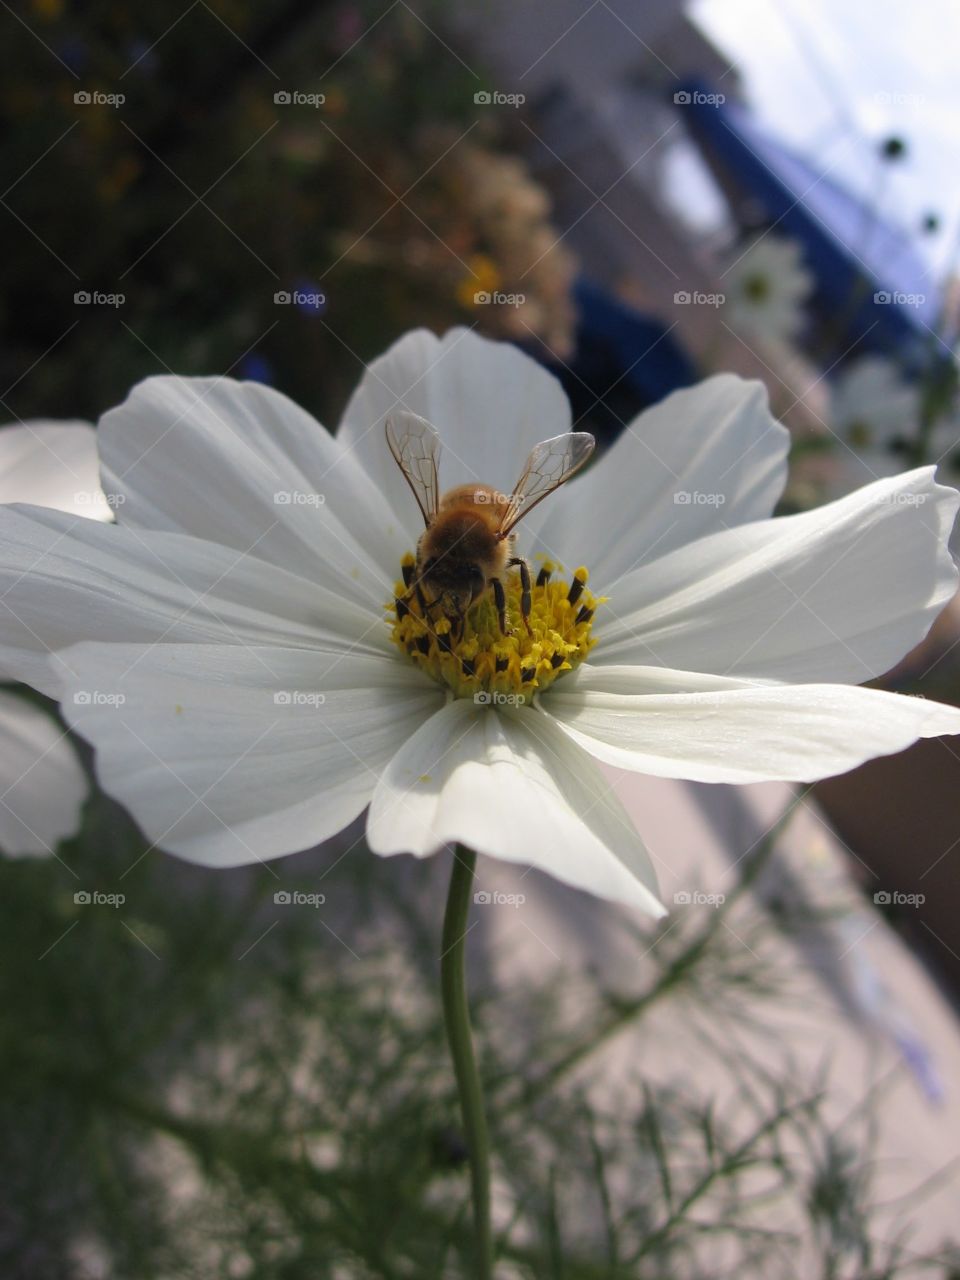 Honeybee collecting pollen from white cosmo.